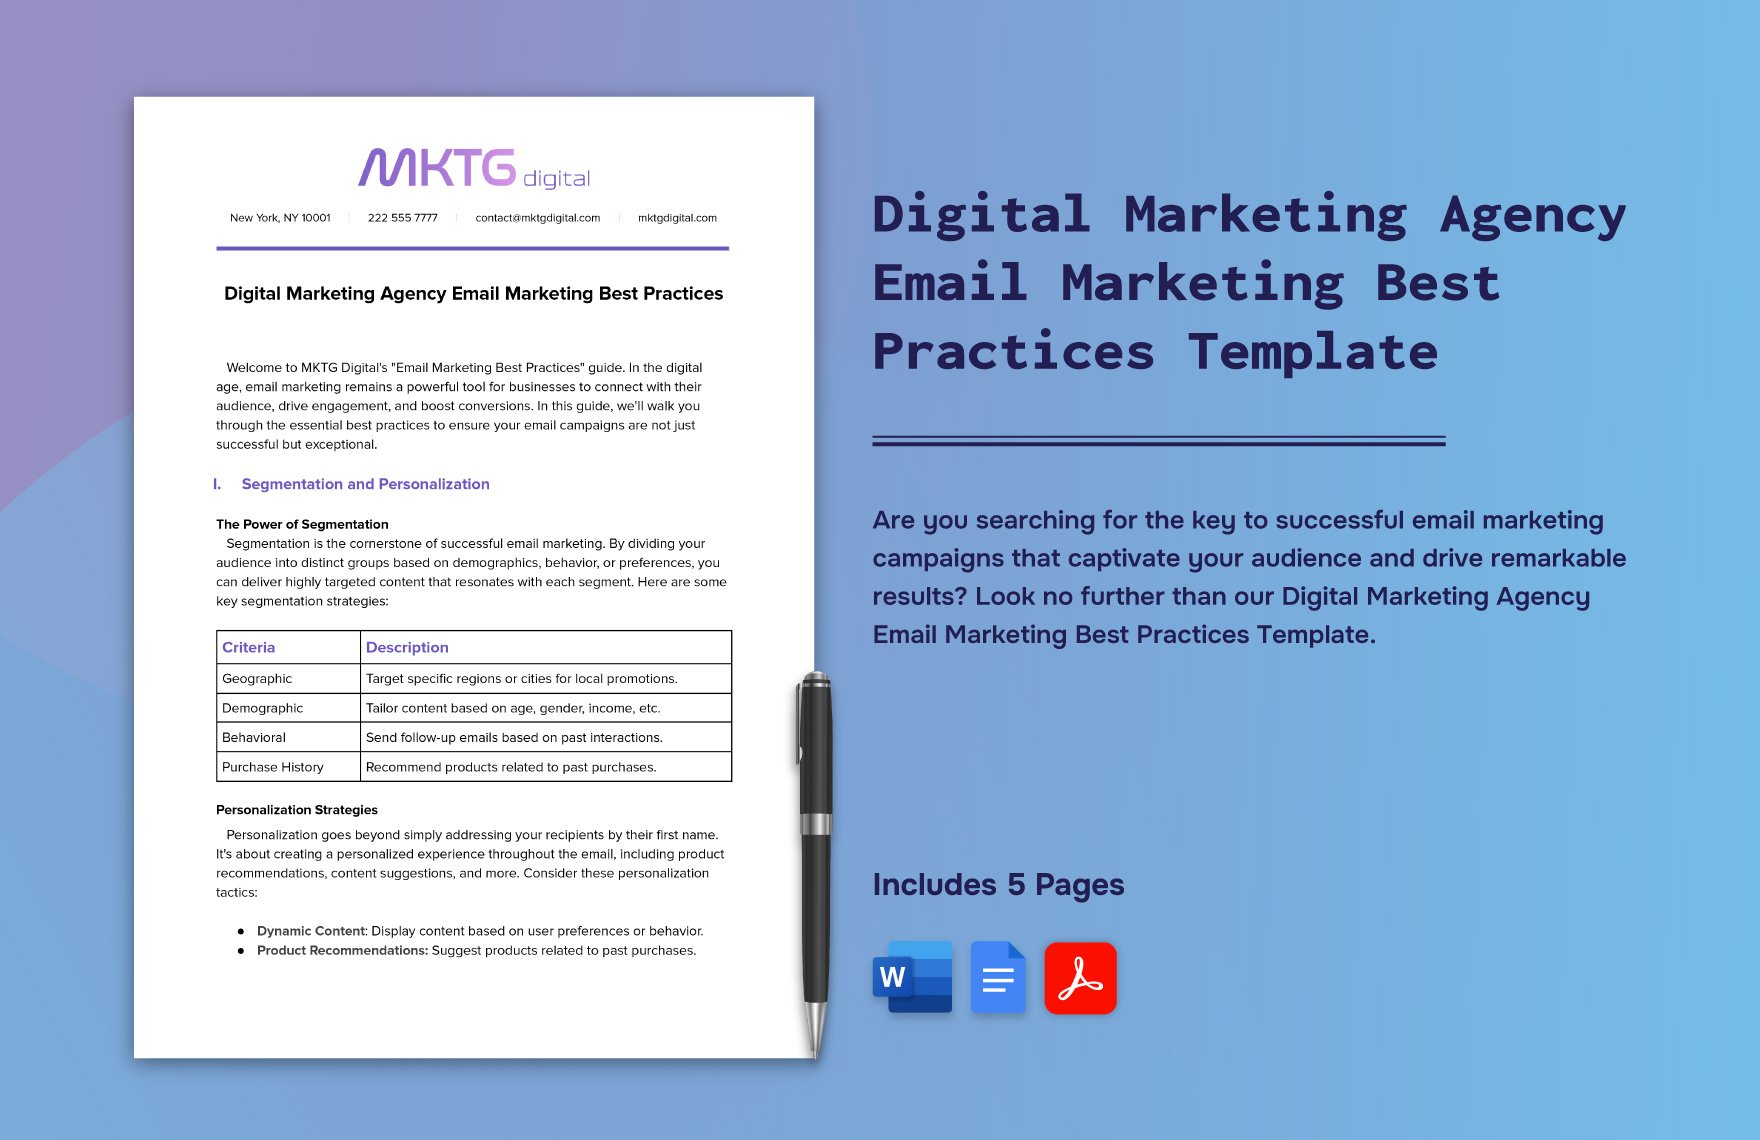 Digital Marketing Agency Email Marketing Best Practices Template in Word, Google Docs, PDF